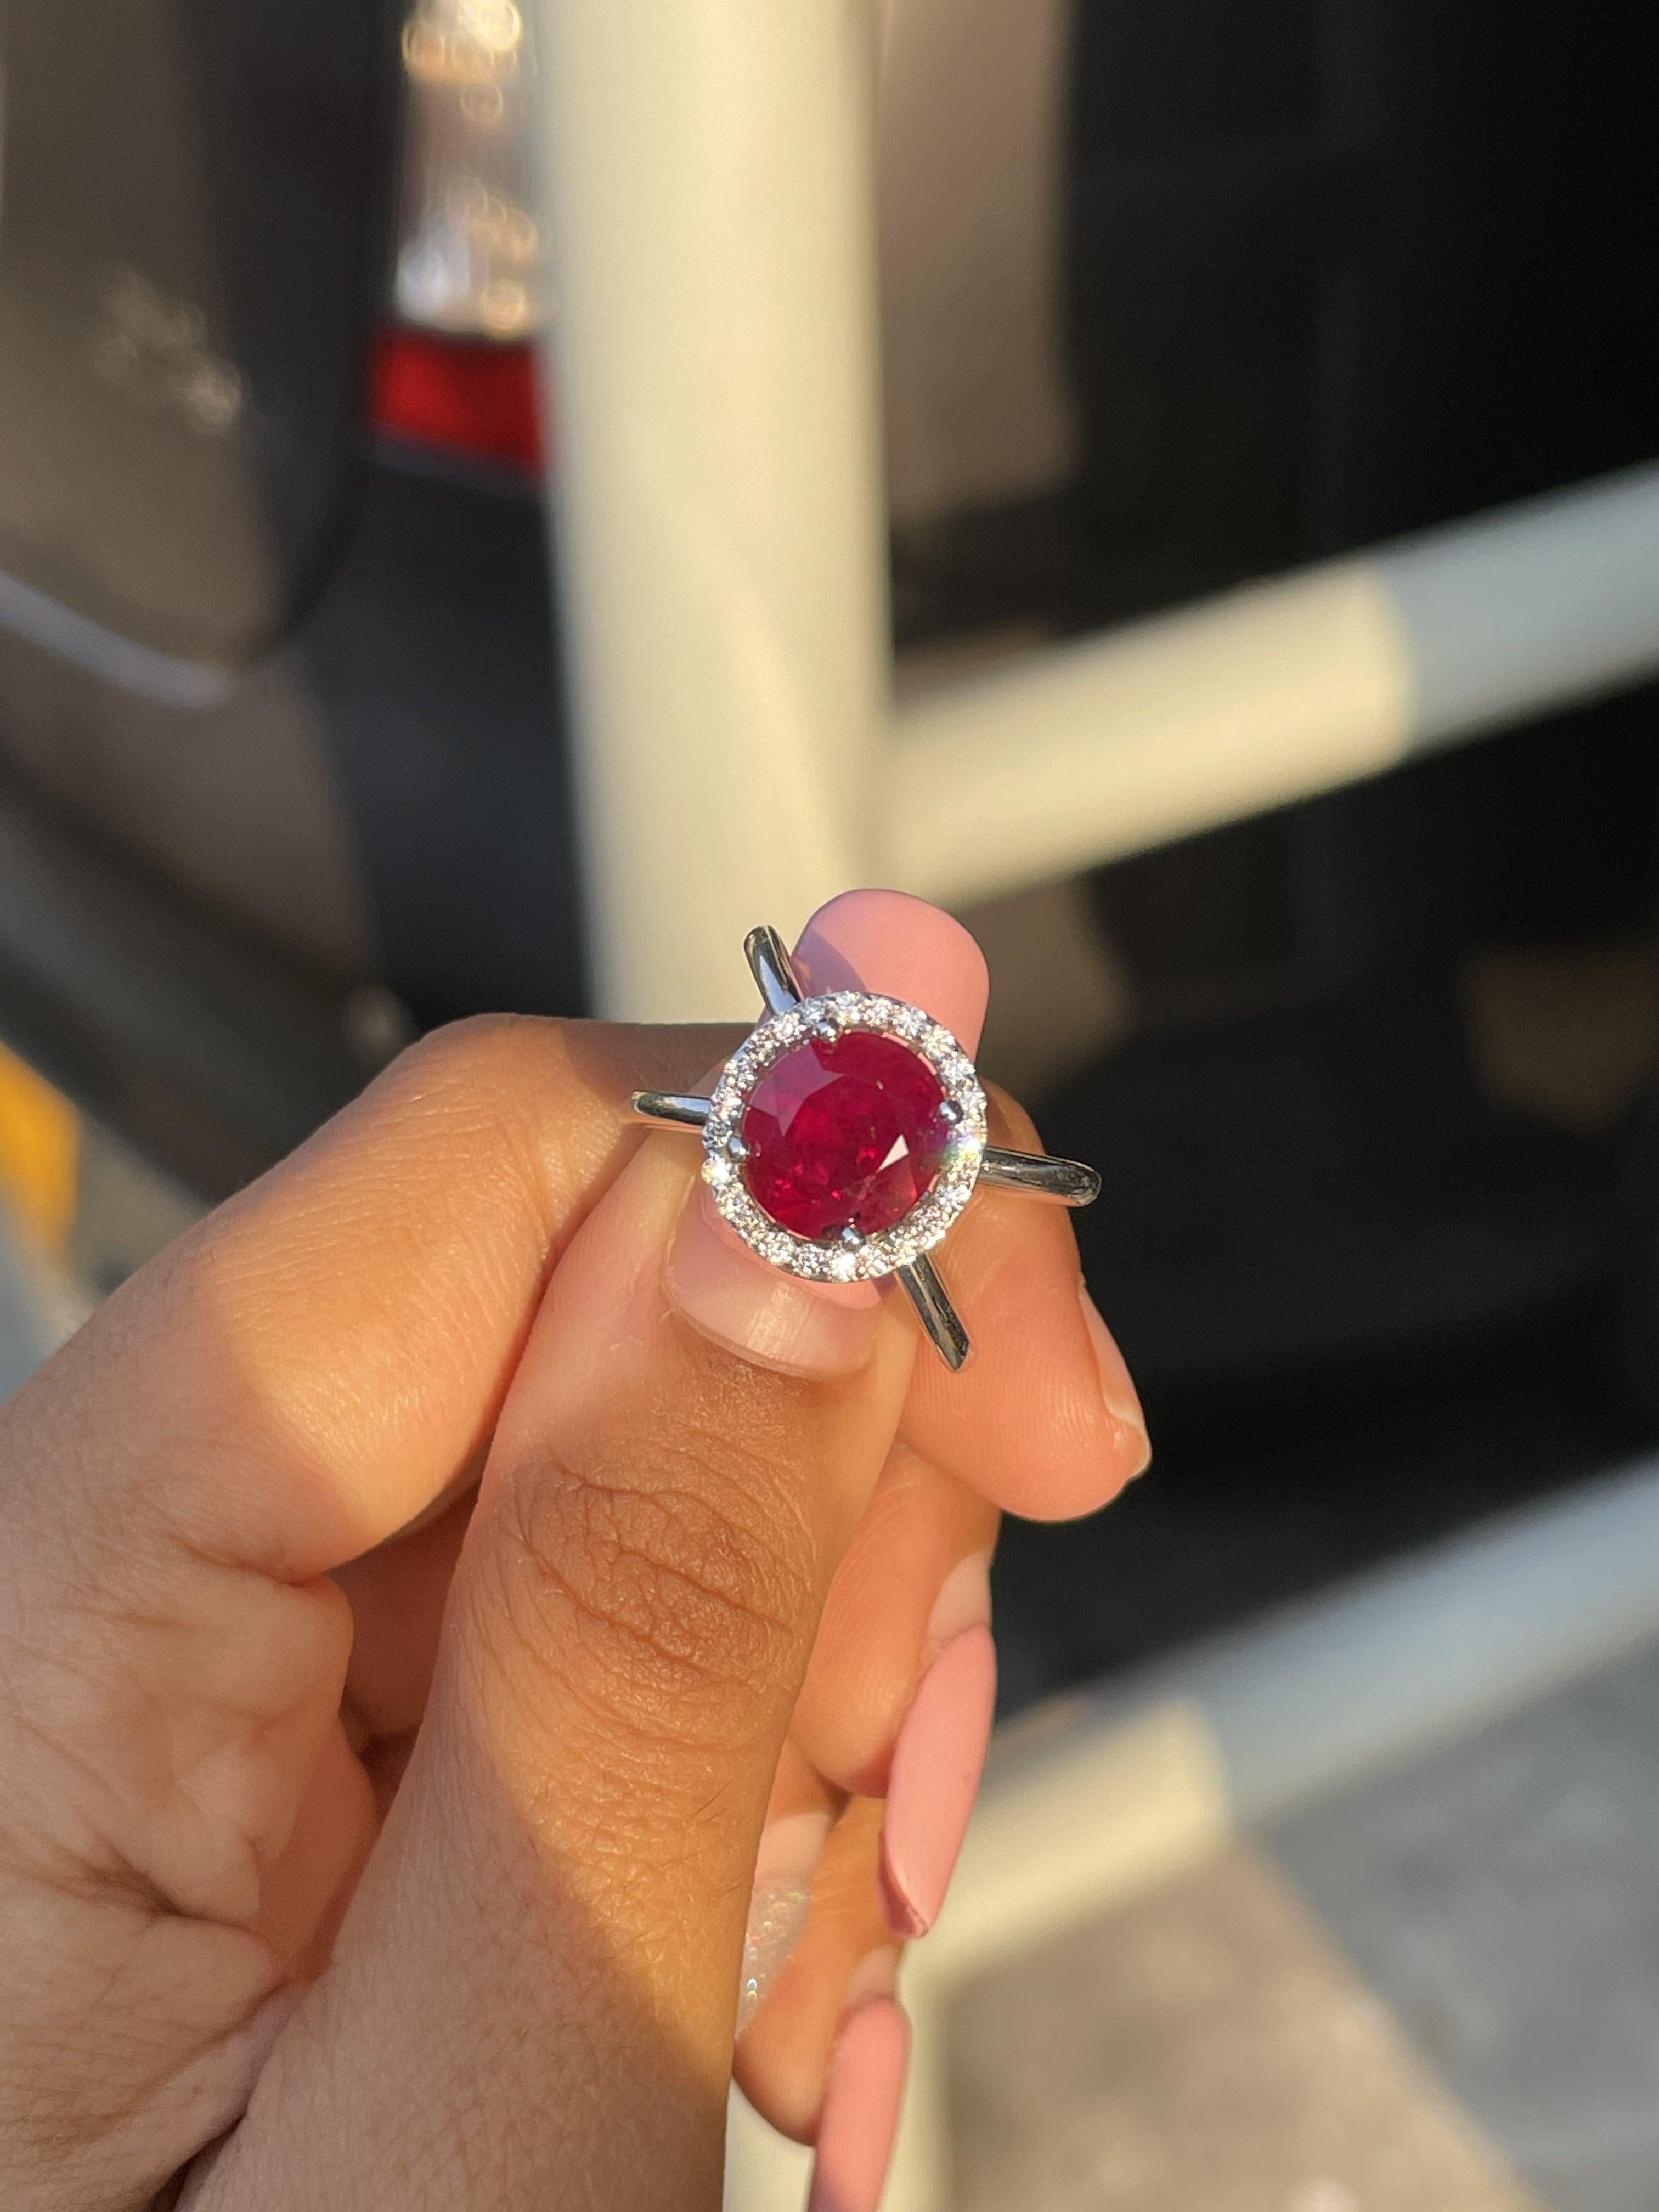 18K White Gold Fancy Cross Band 3.23 Ct Round Mozambique Ruby Ring For Sale 5